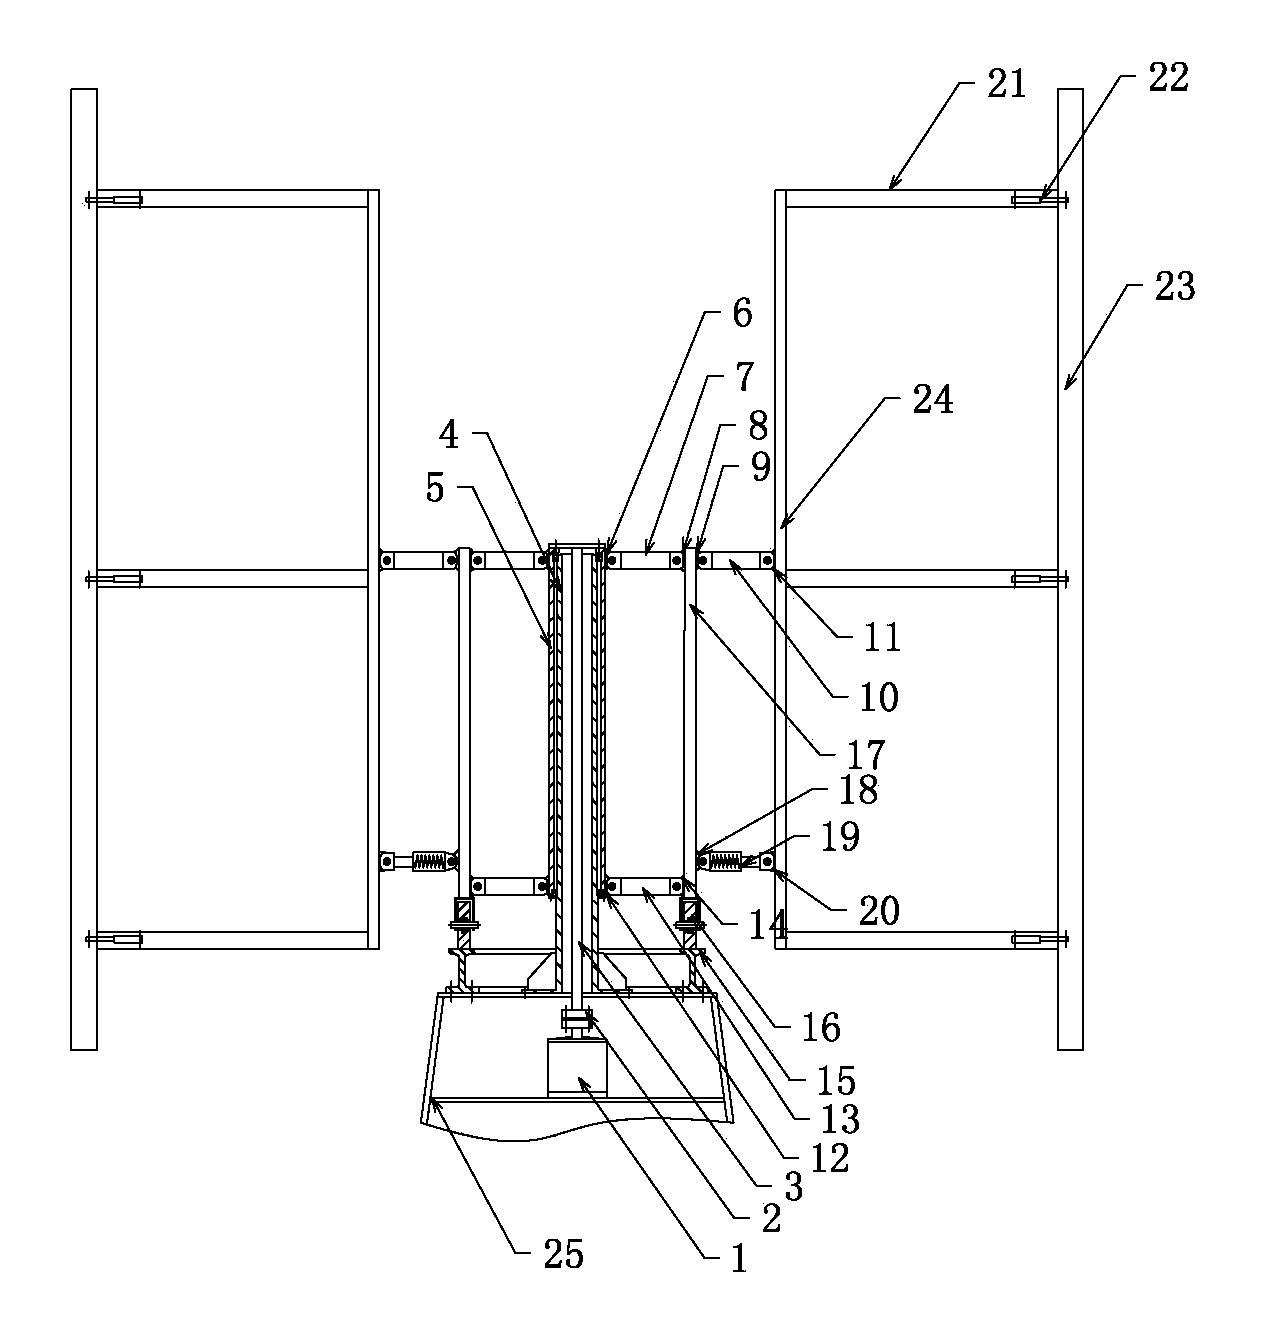 Large variable-pitch-type vertical axis wind turbine generator system